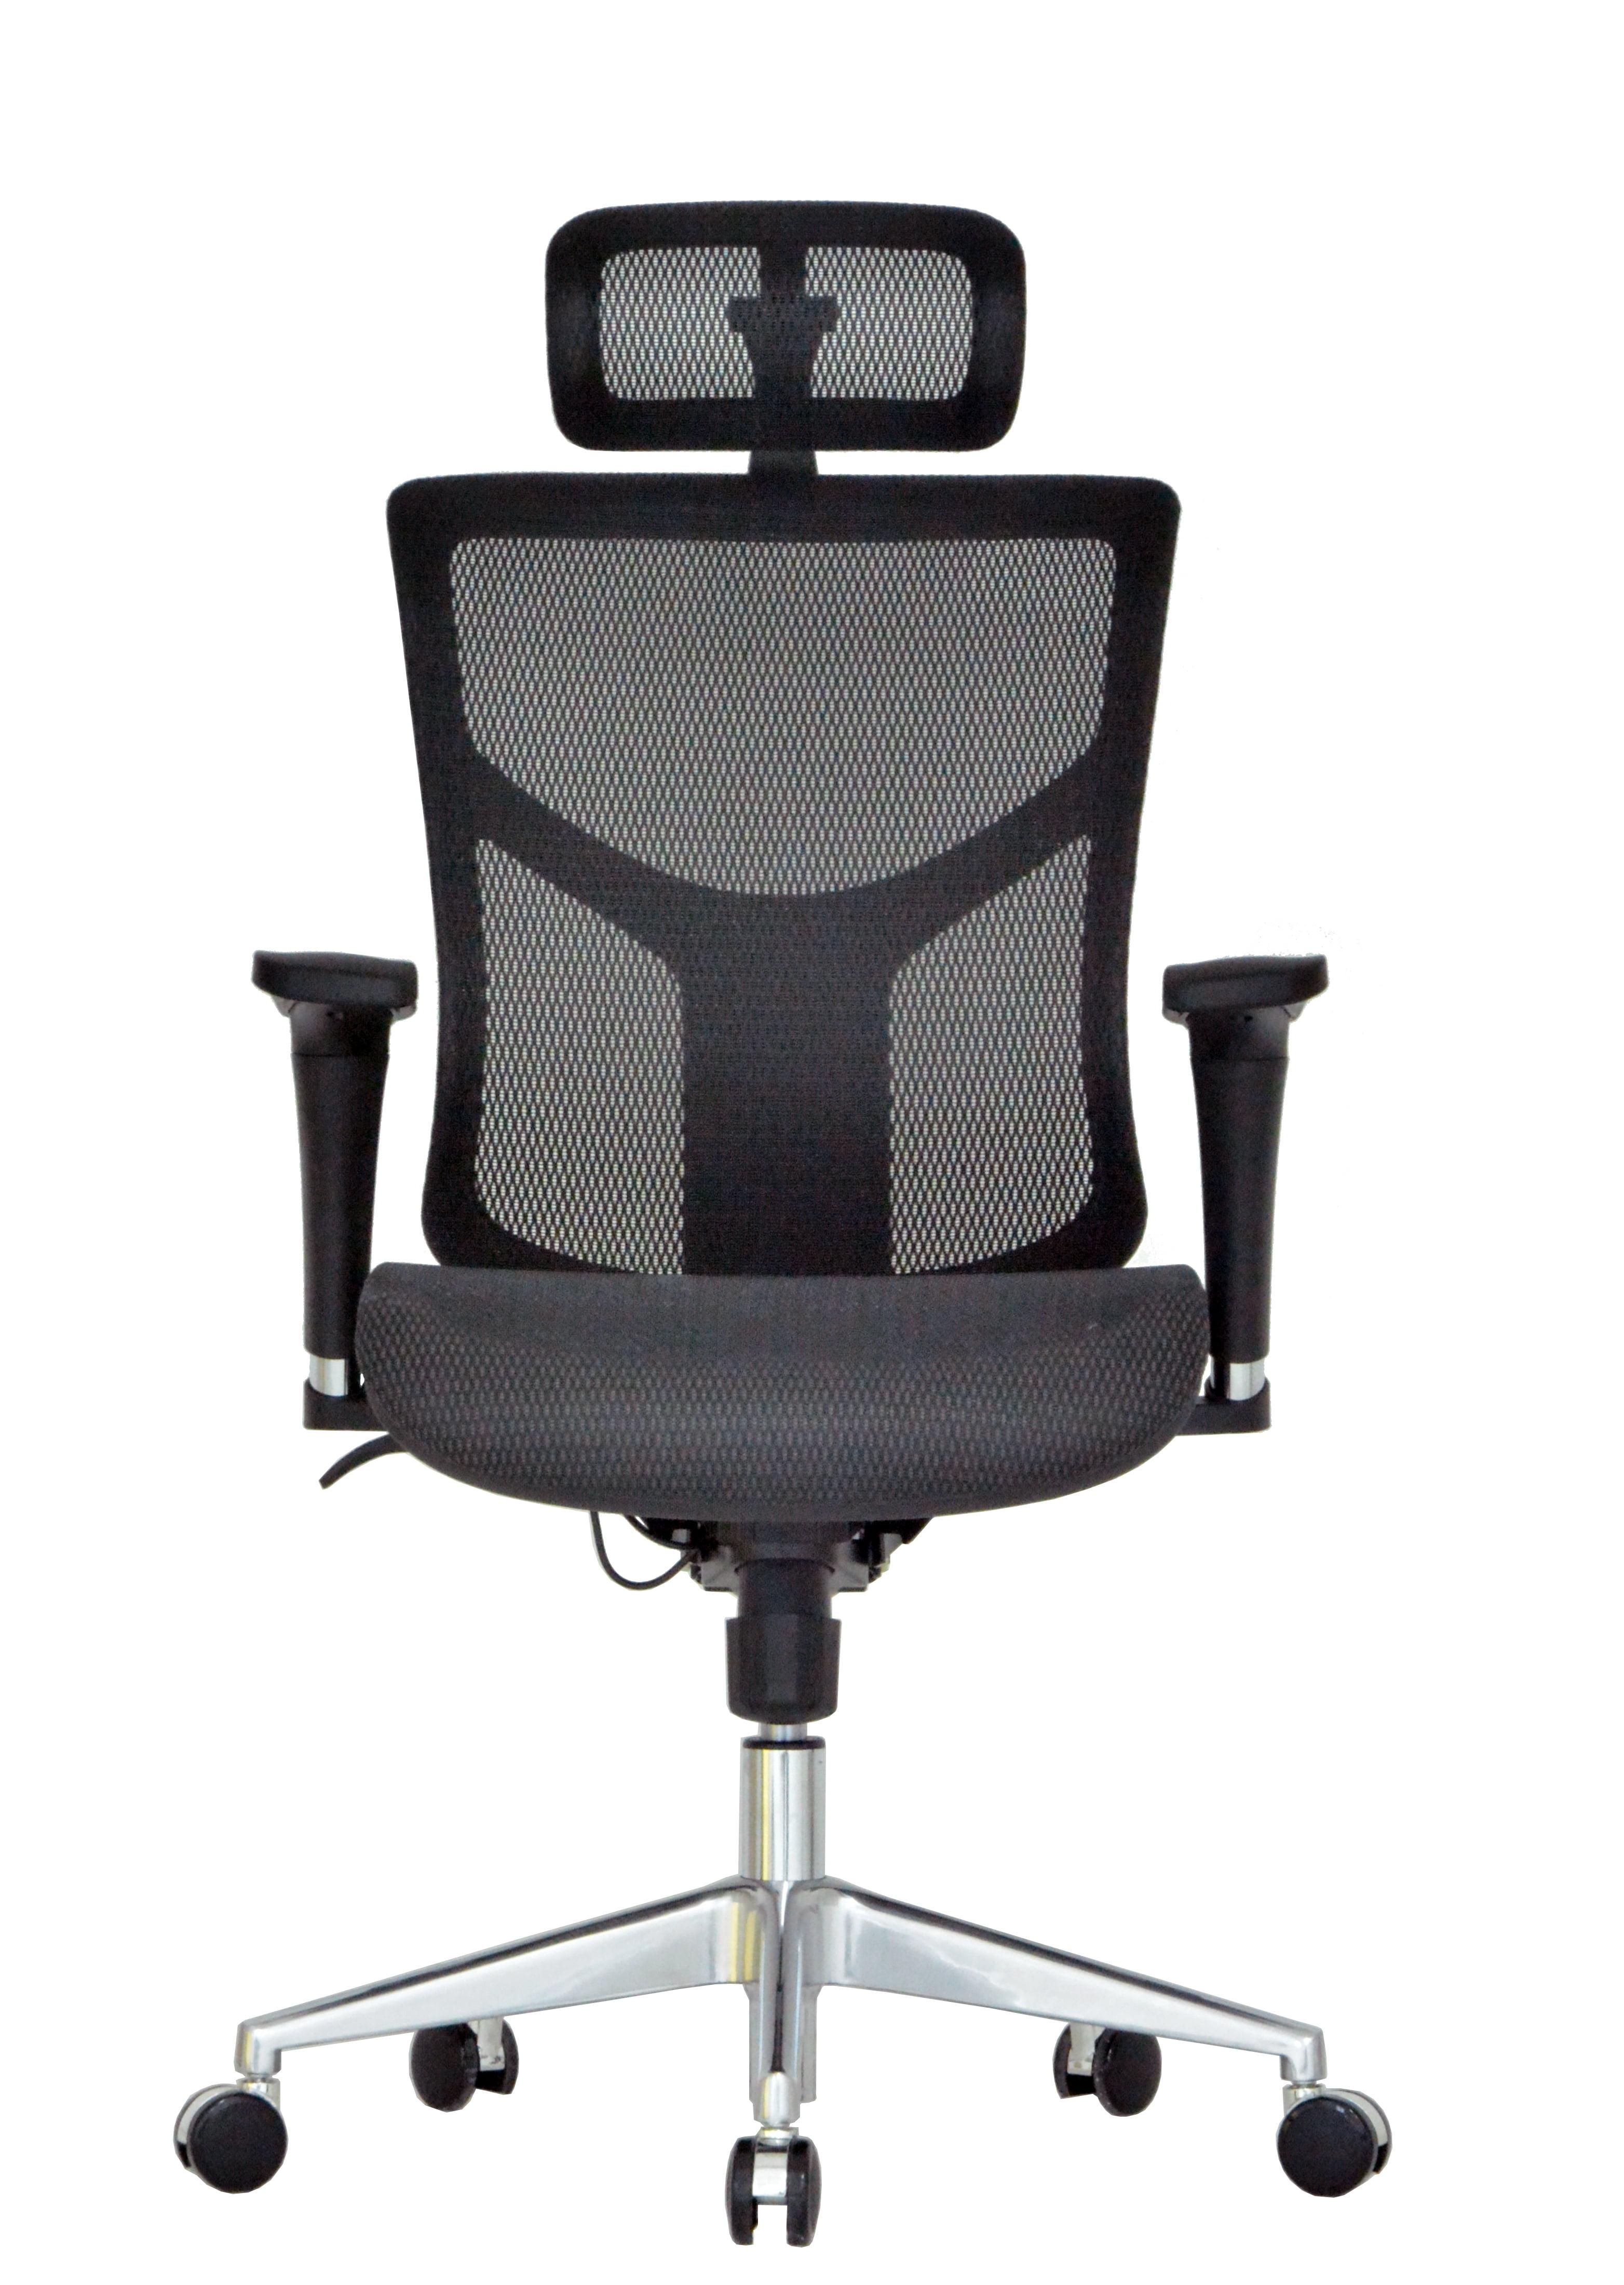 Executive High-Back Swivel Chair with Adjustable Arms in Black Mesh